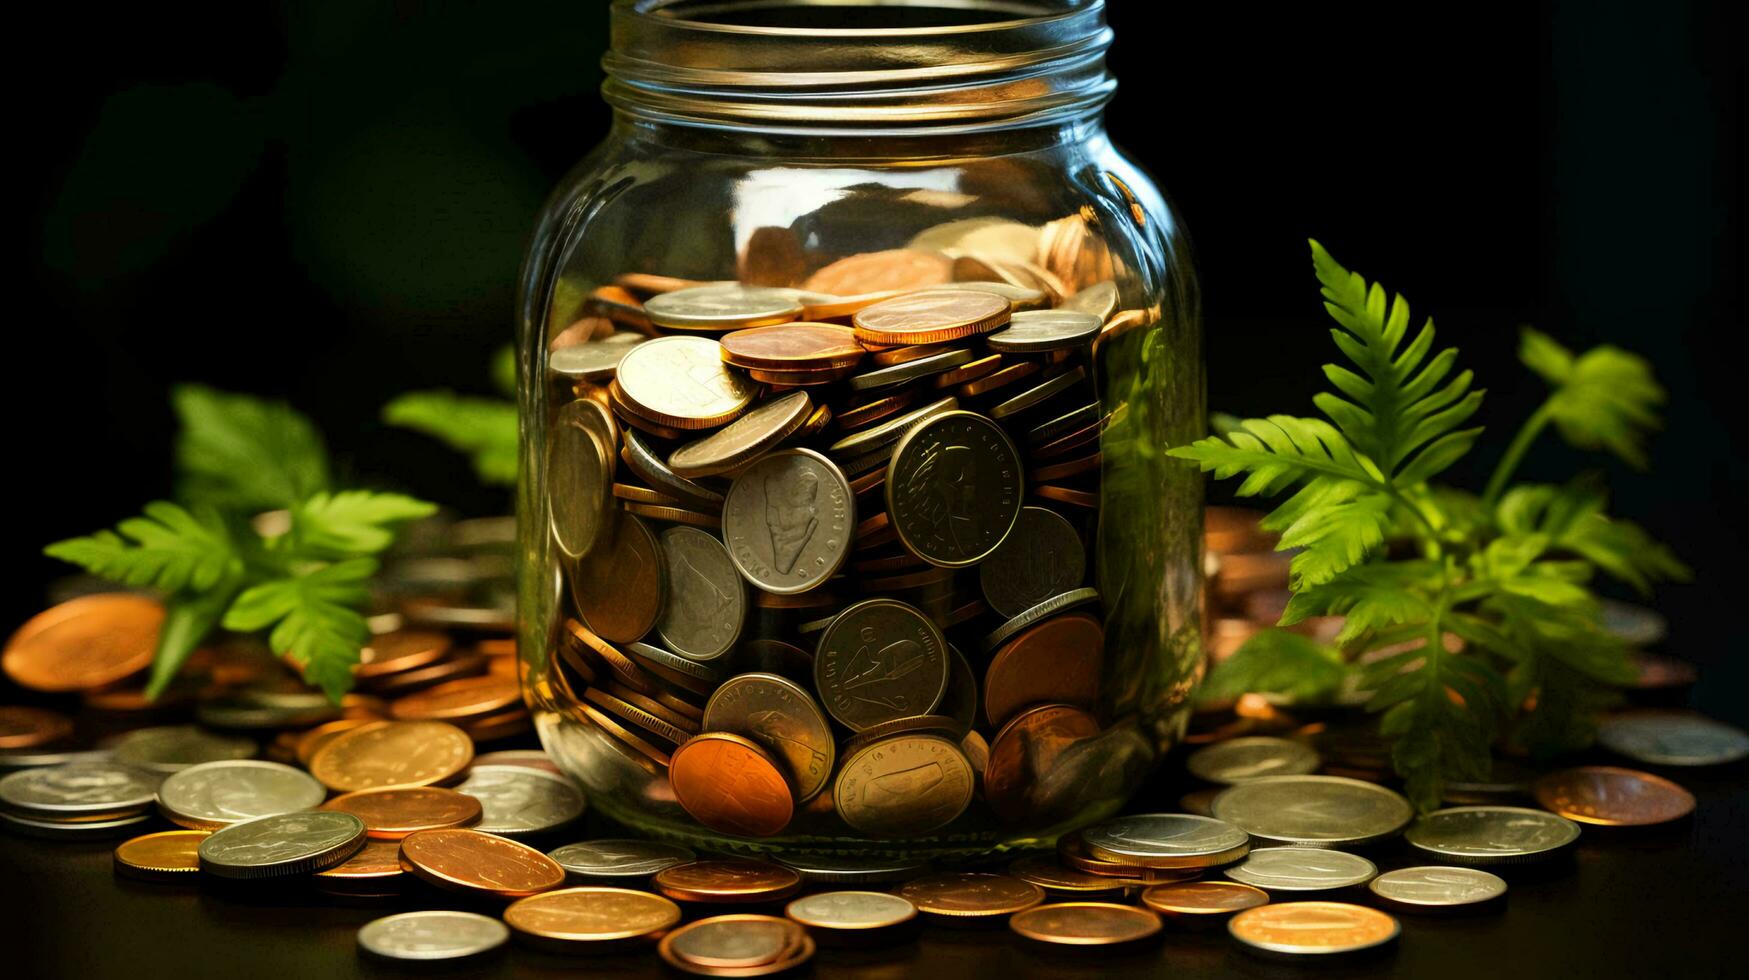 Glass jar with coins. Concept of finance economy investment and accumulation of money photo